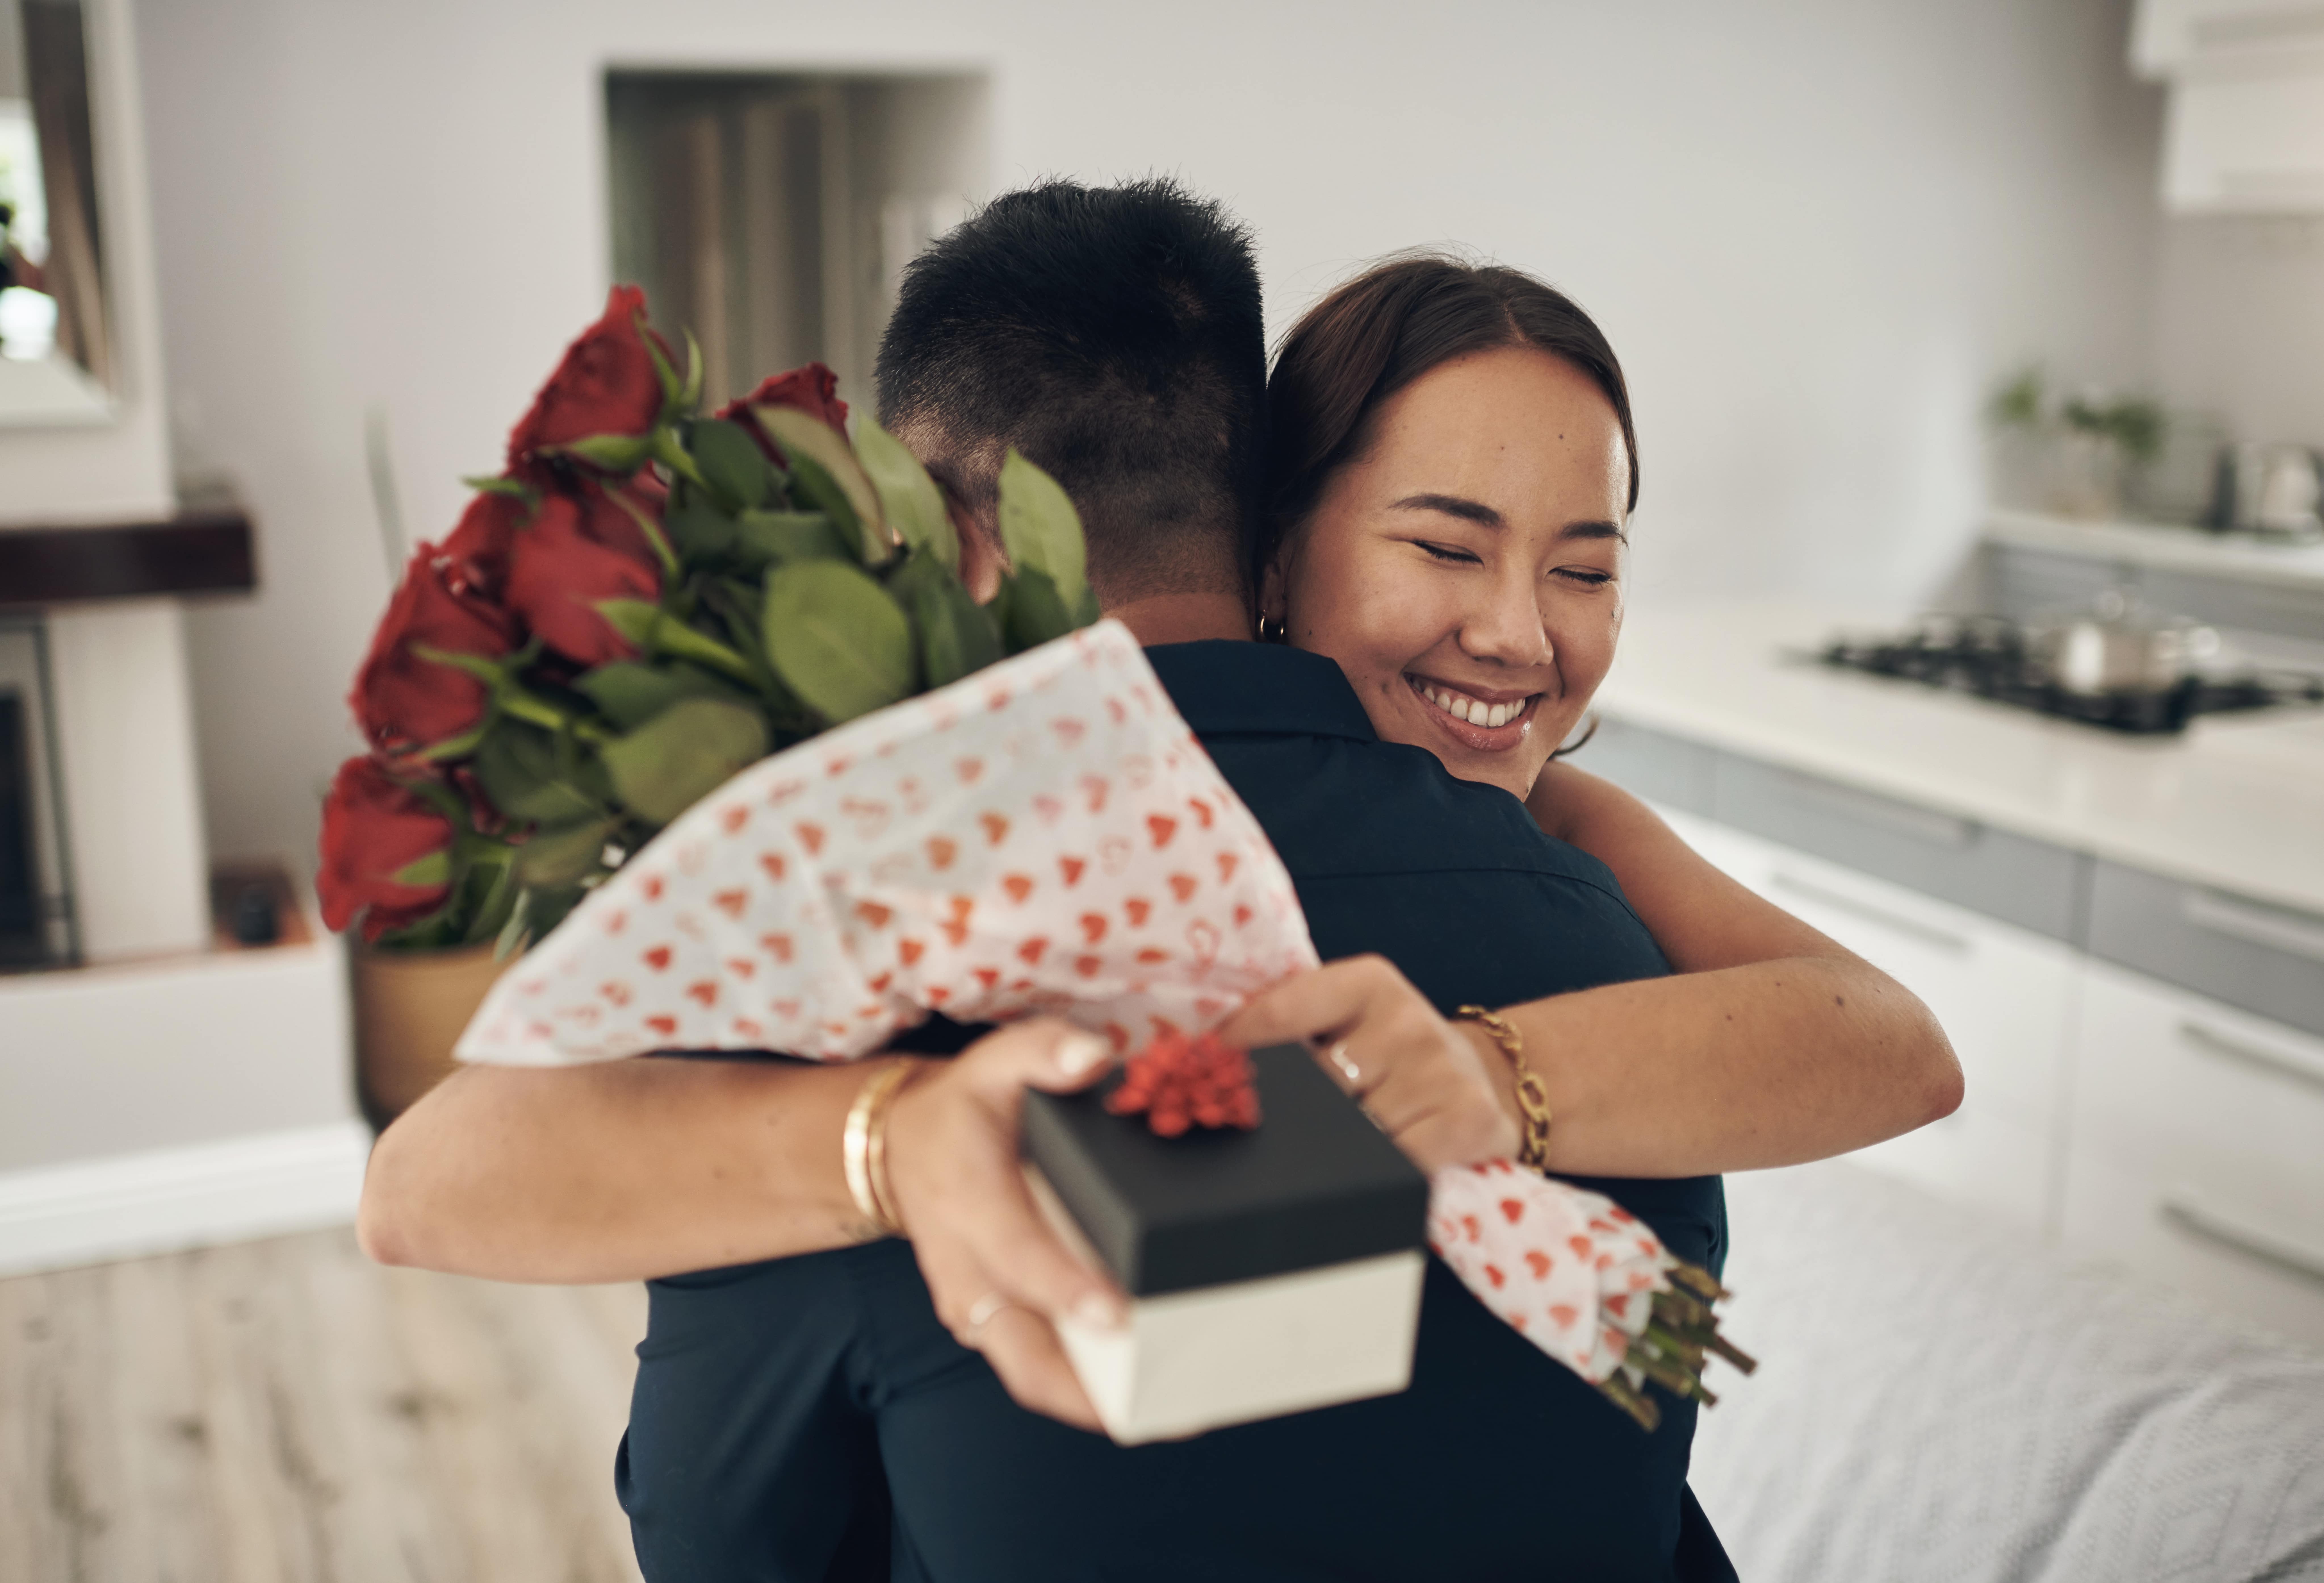 A woman hugs a man and she is holding a bouquet of red roses and a small box with a bow.